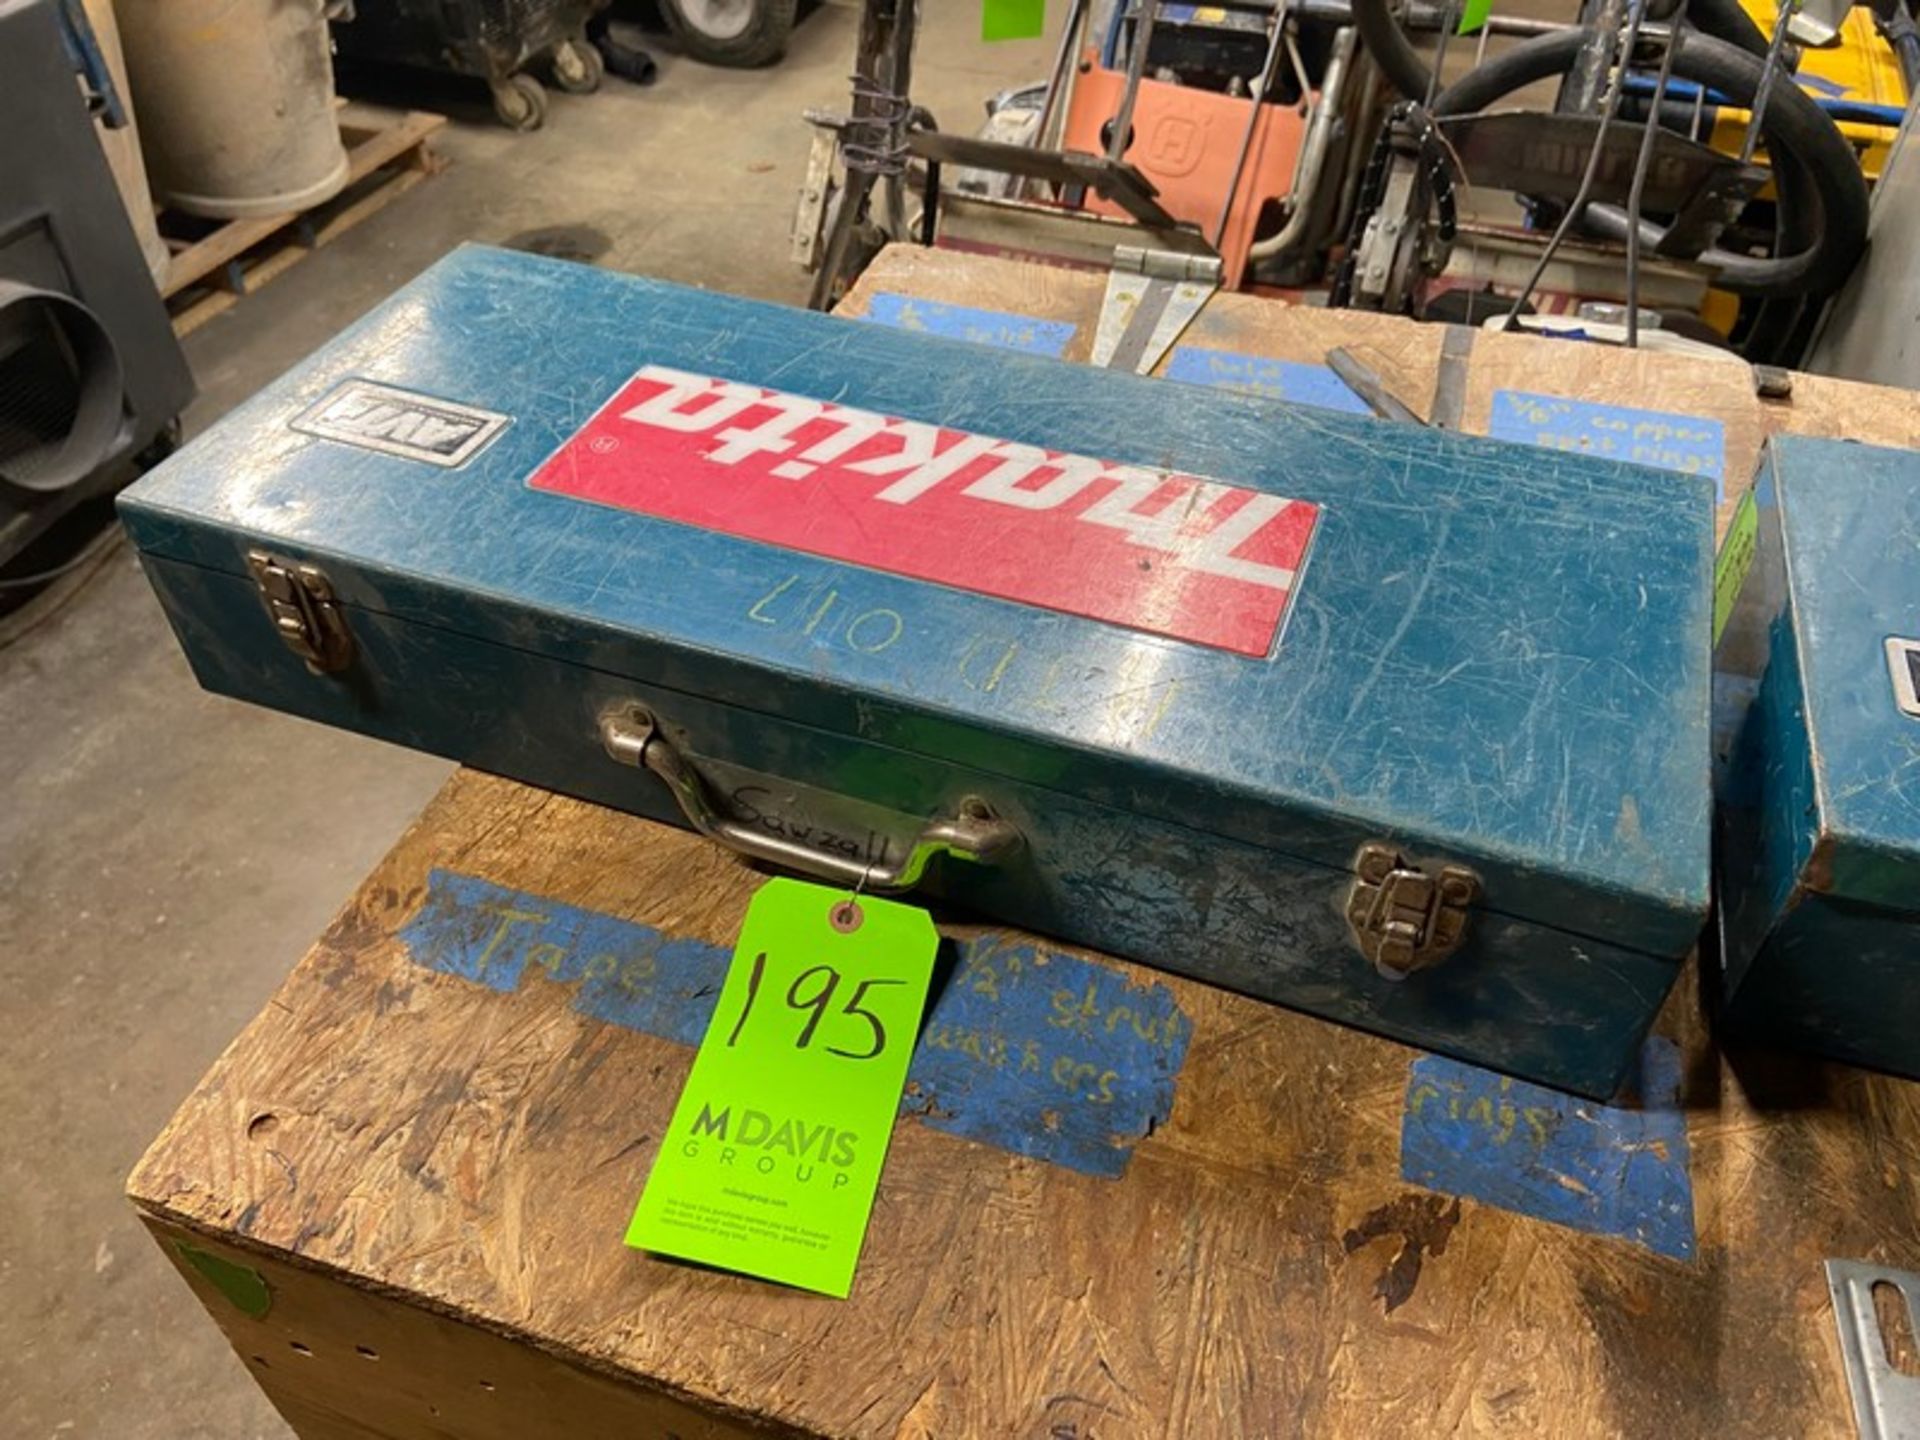 Makita AVT Sawzall Power Tool, S/N 101117A, with Power Cord & Hard Case (LOCATED IN MONROEVILLE, - Image 4 of 4